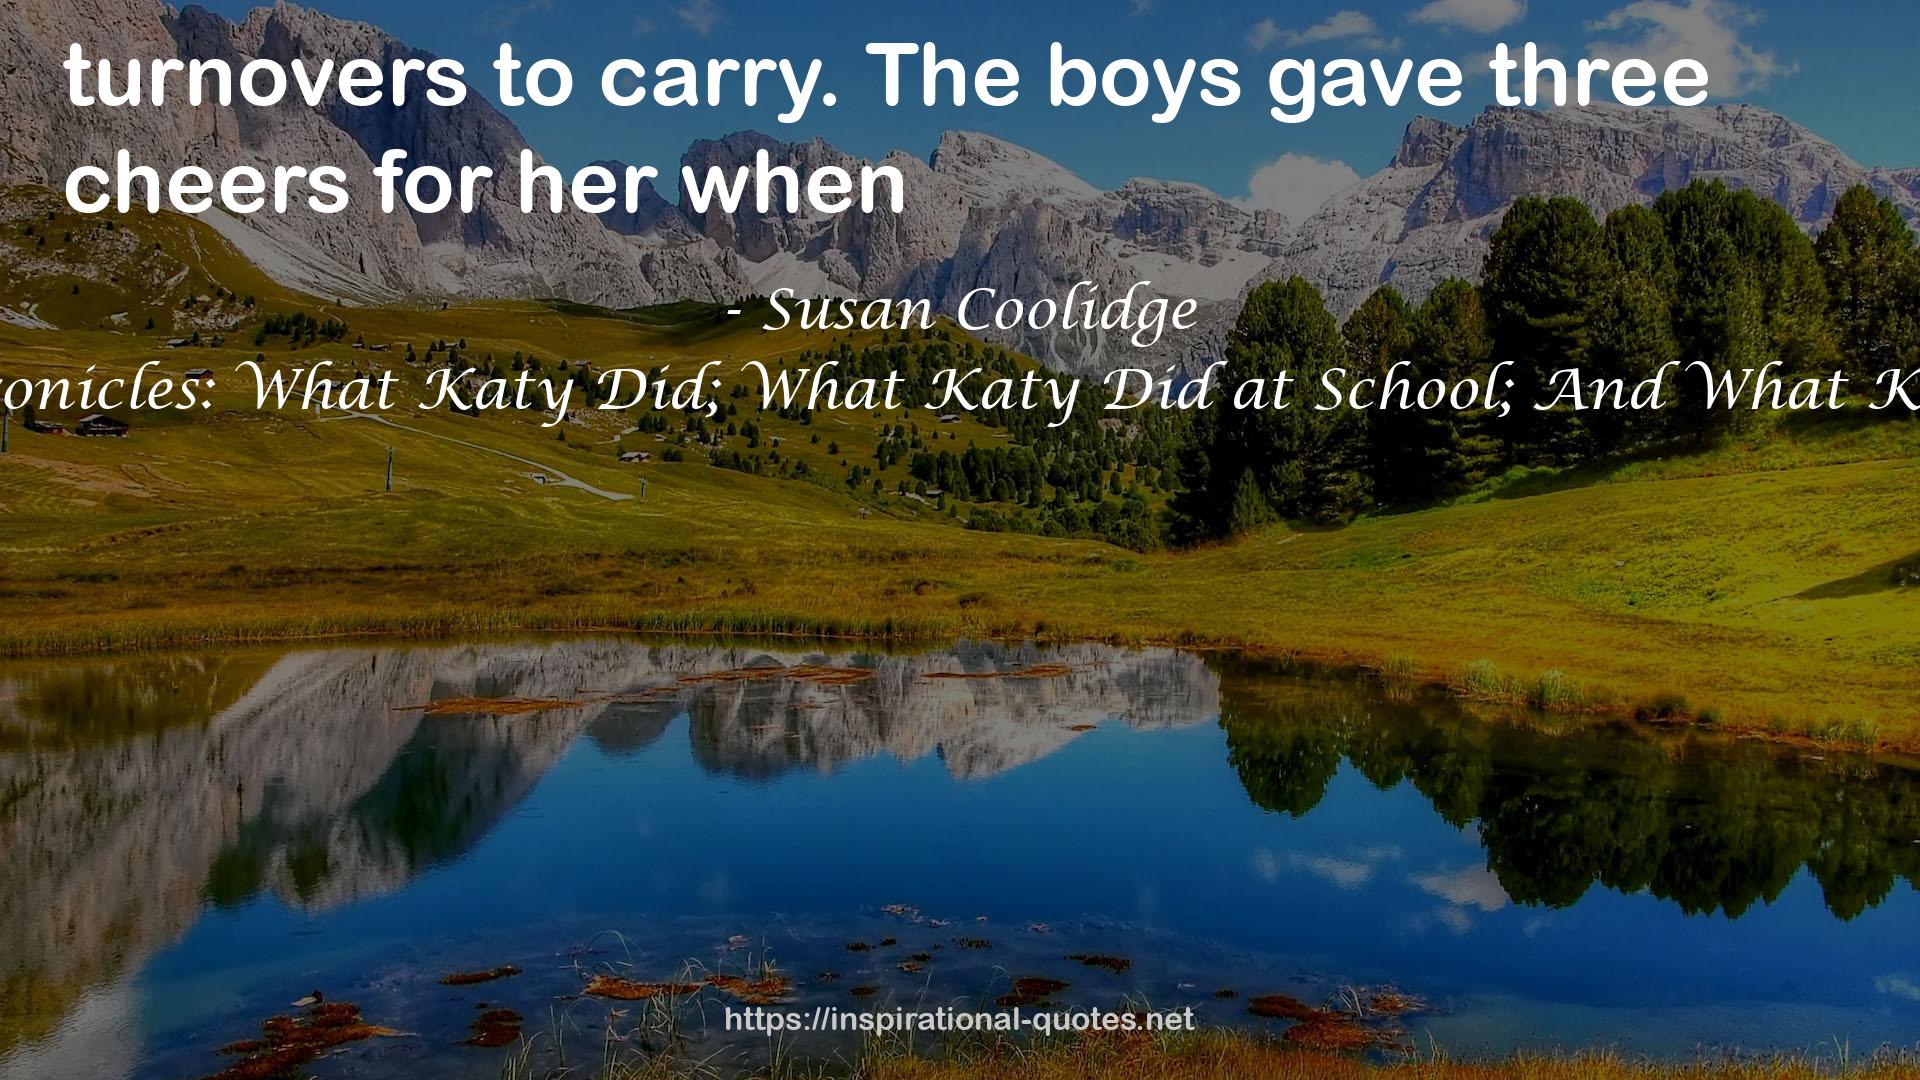 The Katy Chronicles: What Katy Did; What Katy Did at School; And What Katy Did Next QUOTES